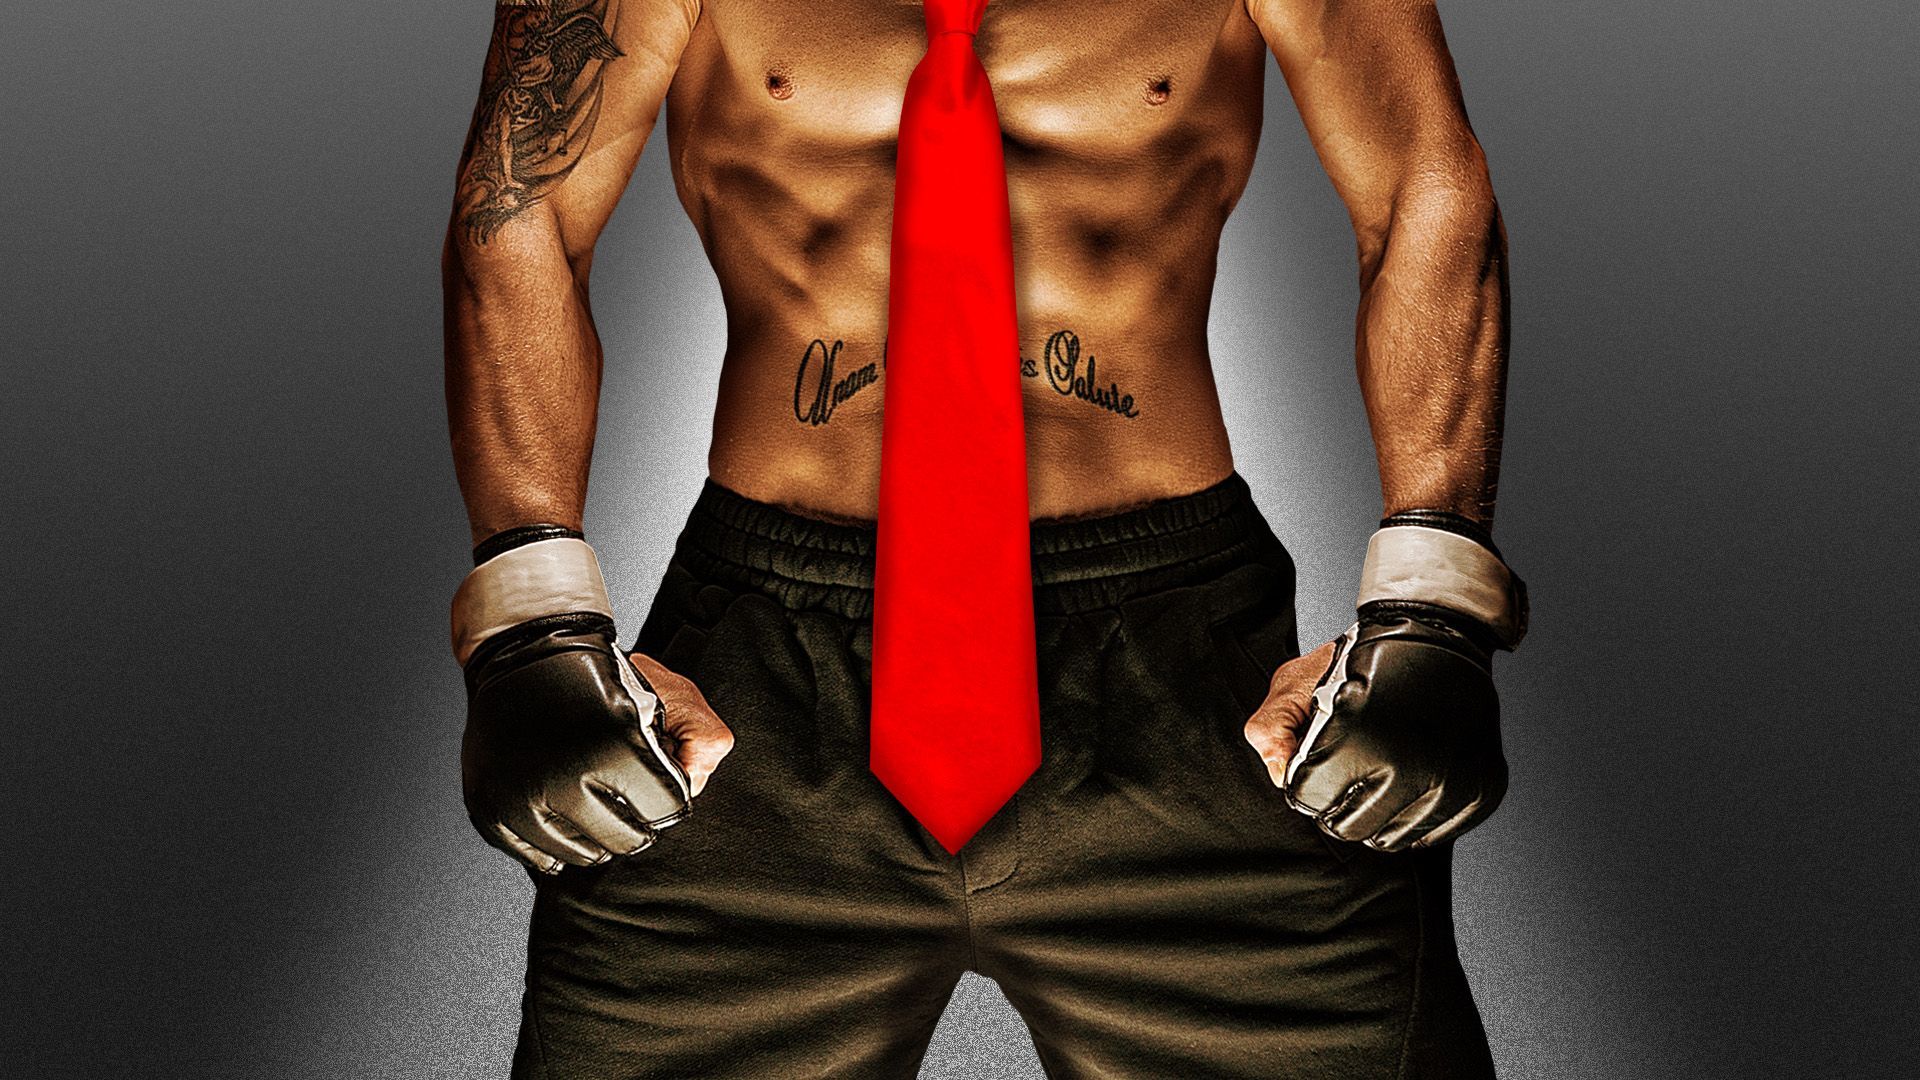 Illustration of a UFC fighter posing with a giant red tie